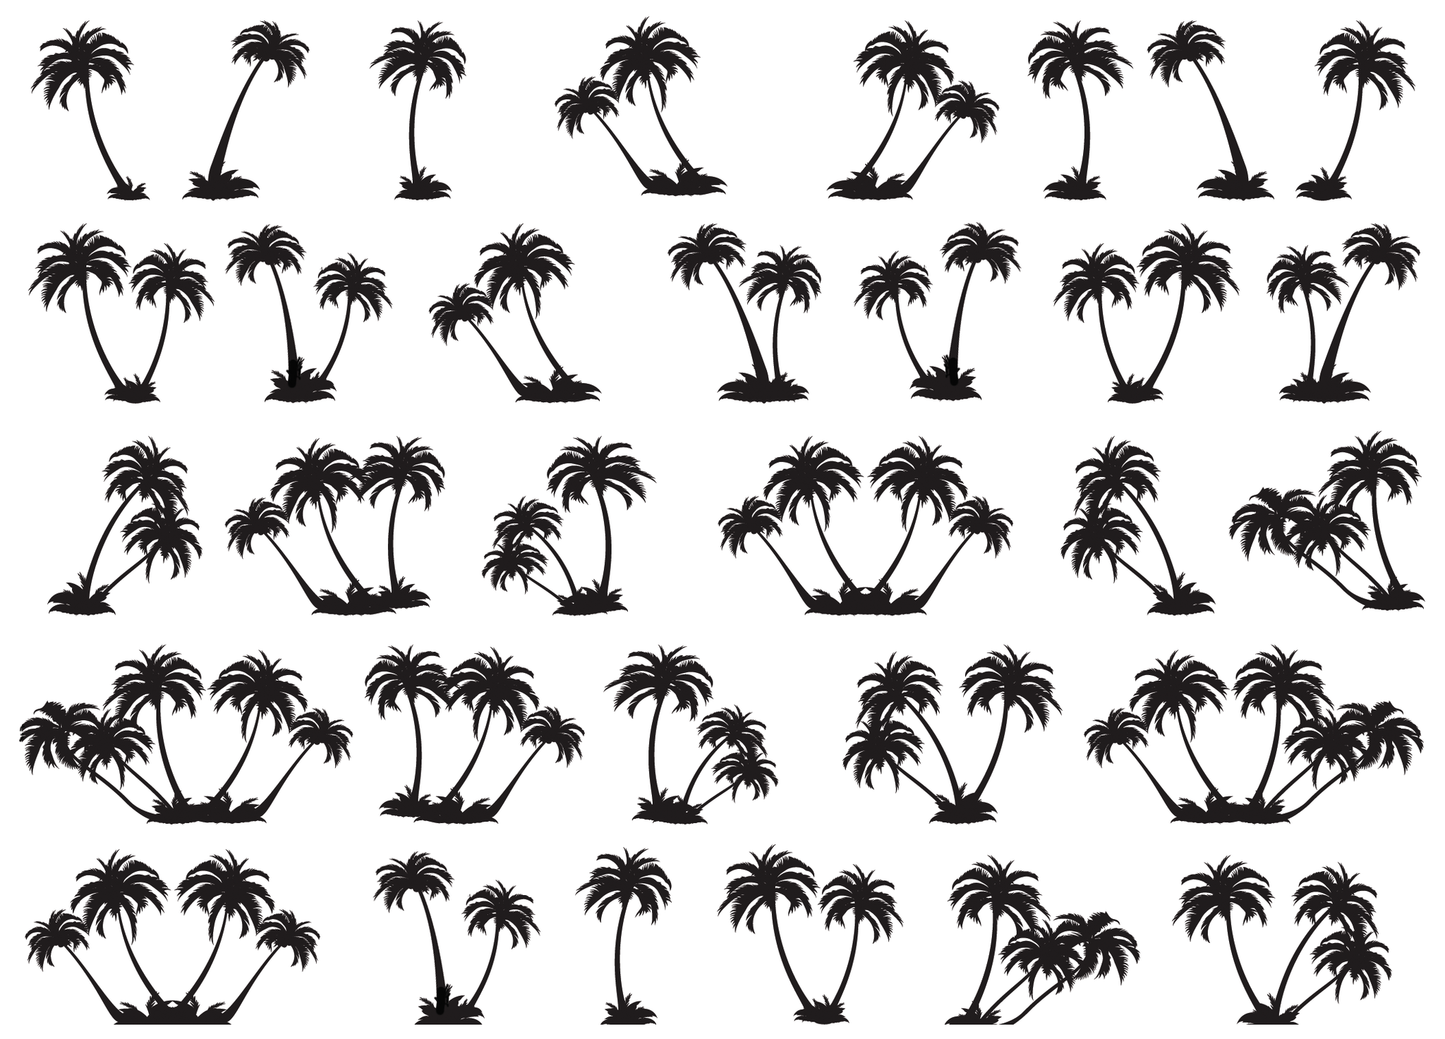 Palm Trees 32 pcs 7/8" Black Fused Glass Decals